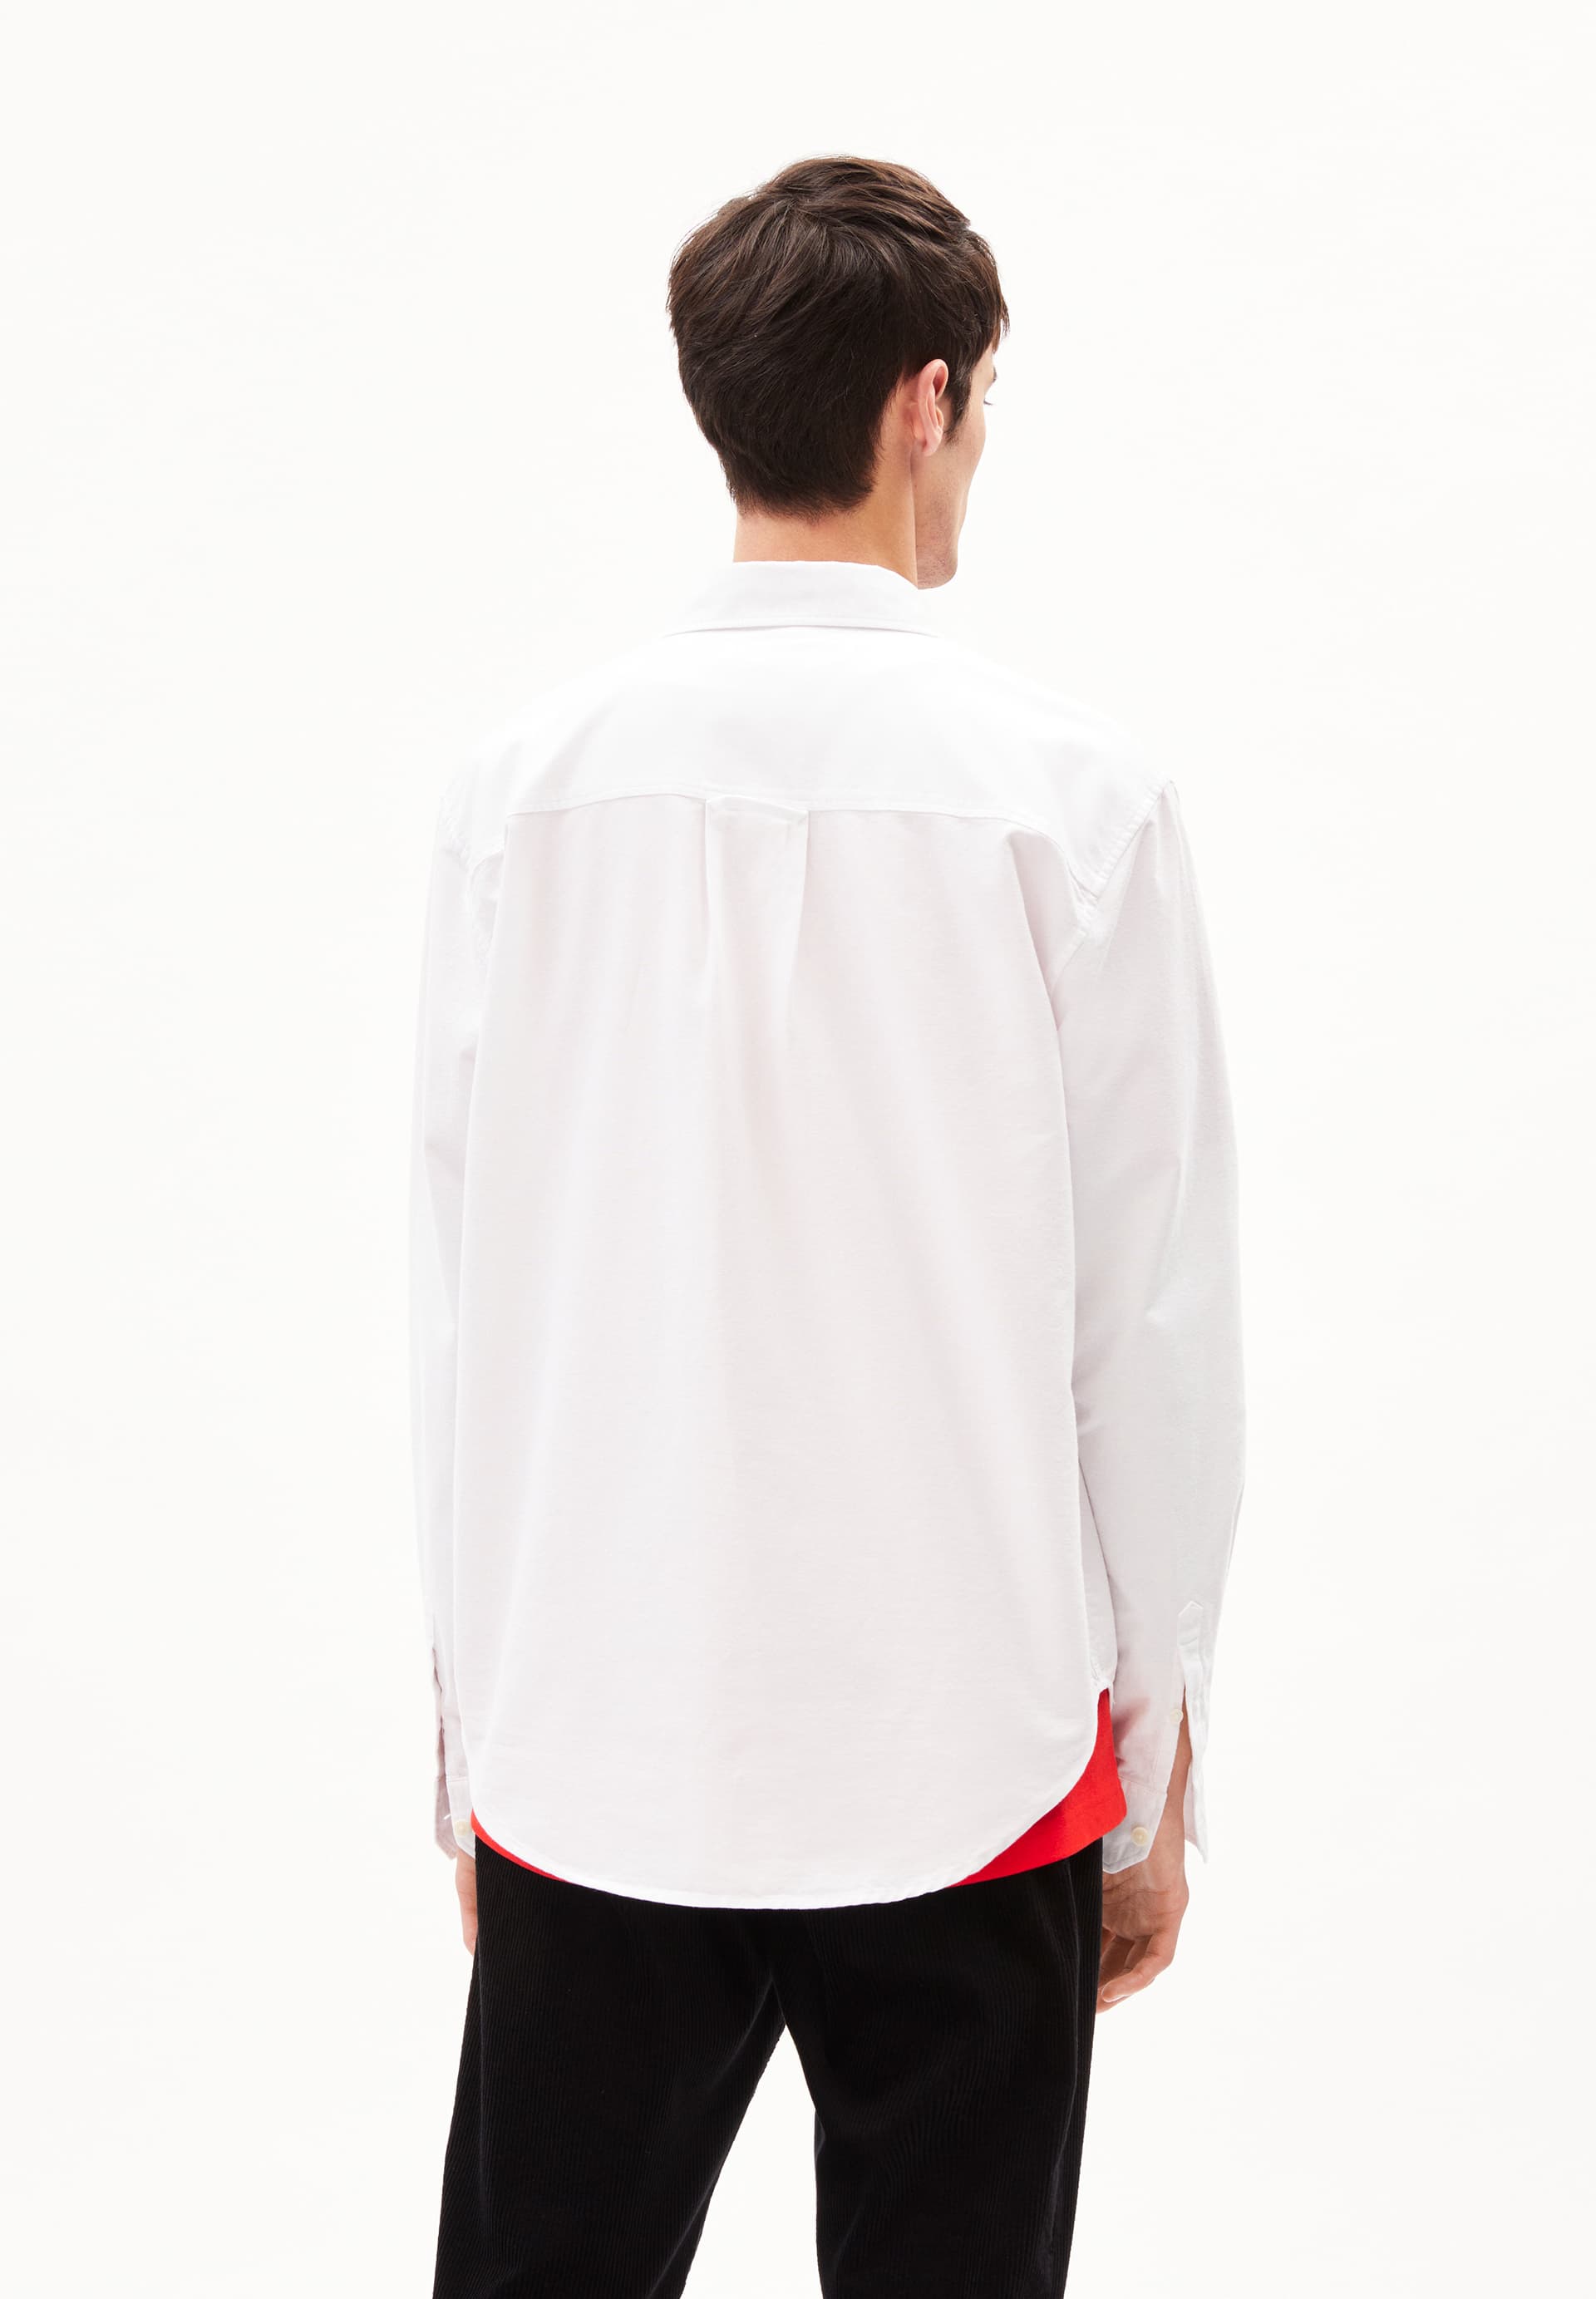 LAAROX Shirt Relaxed Fit made of Organic Cotton